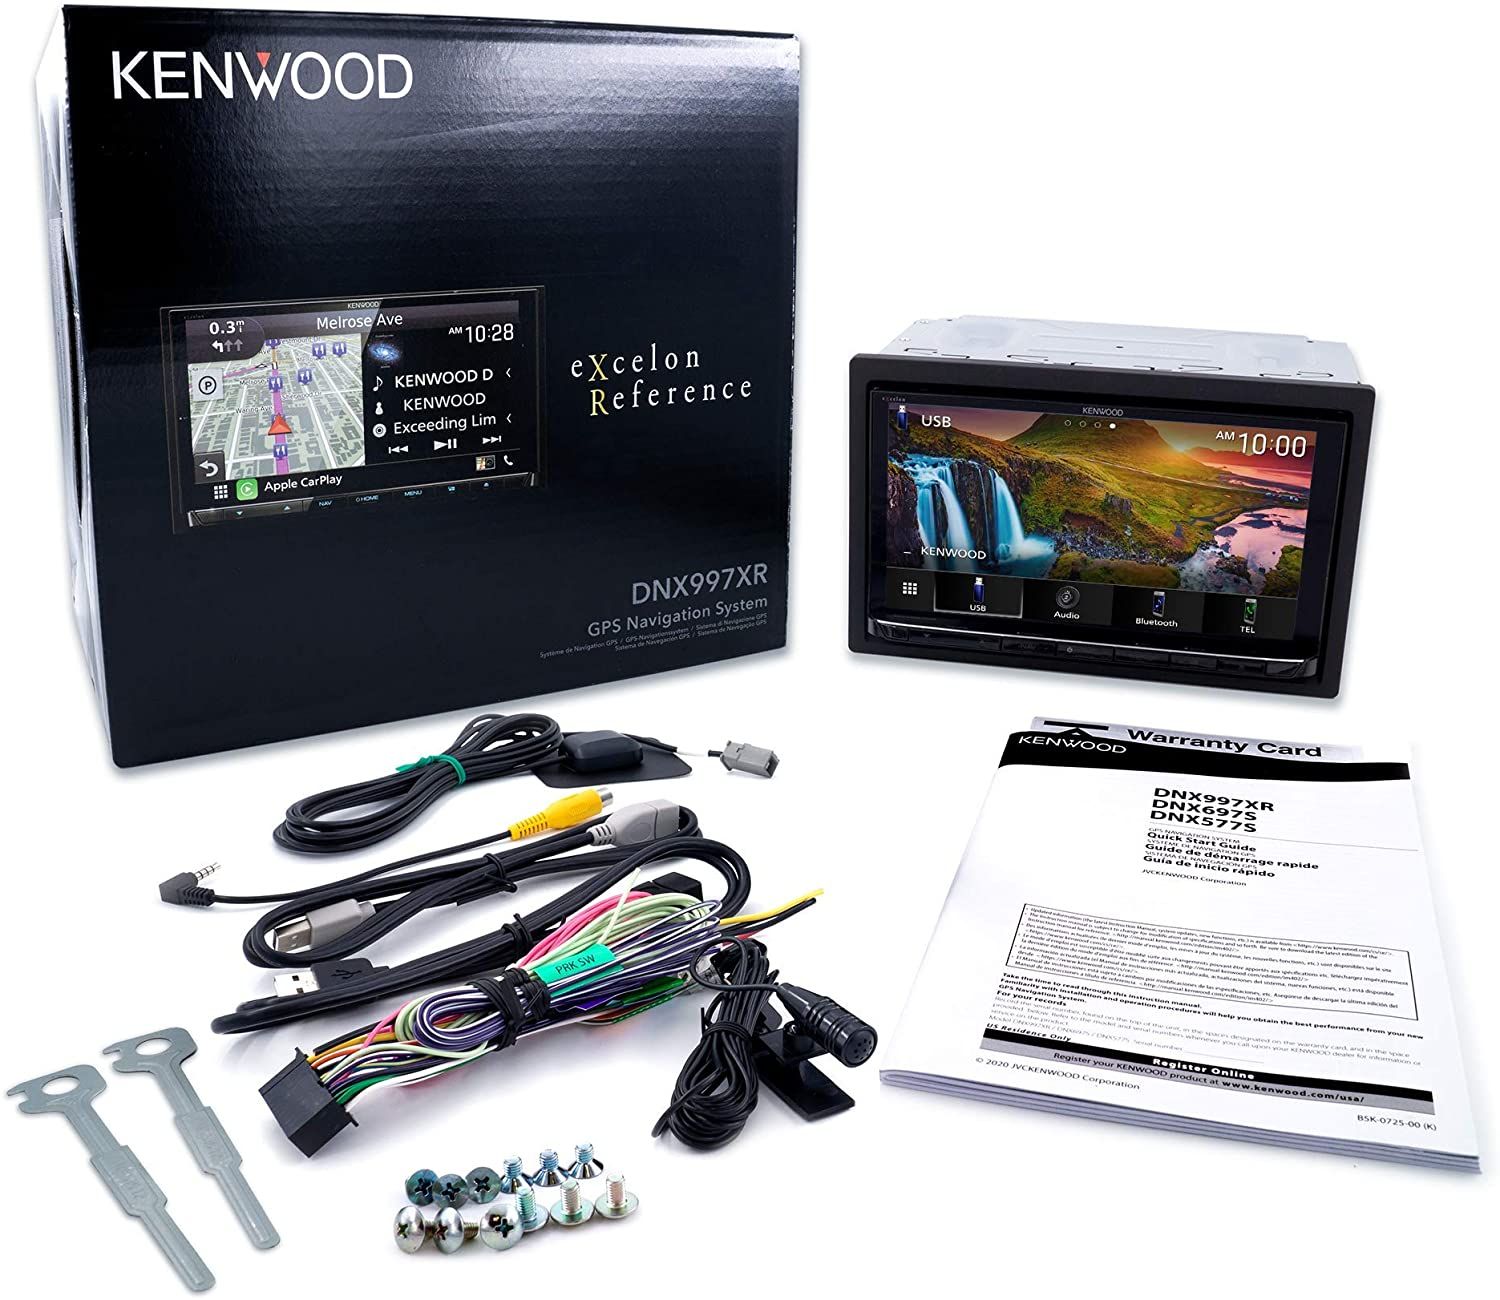 Kenwood Excelon DNX997XR box contents